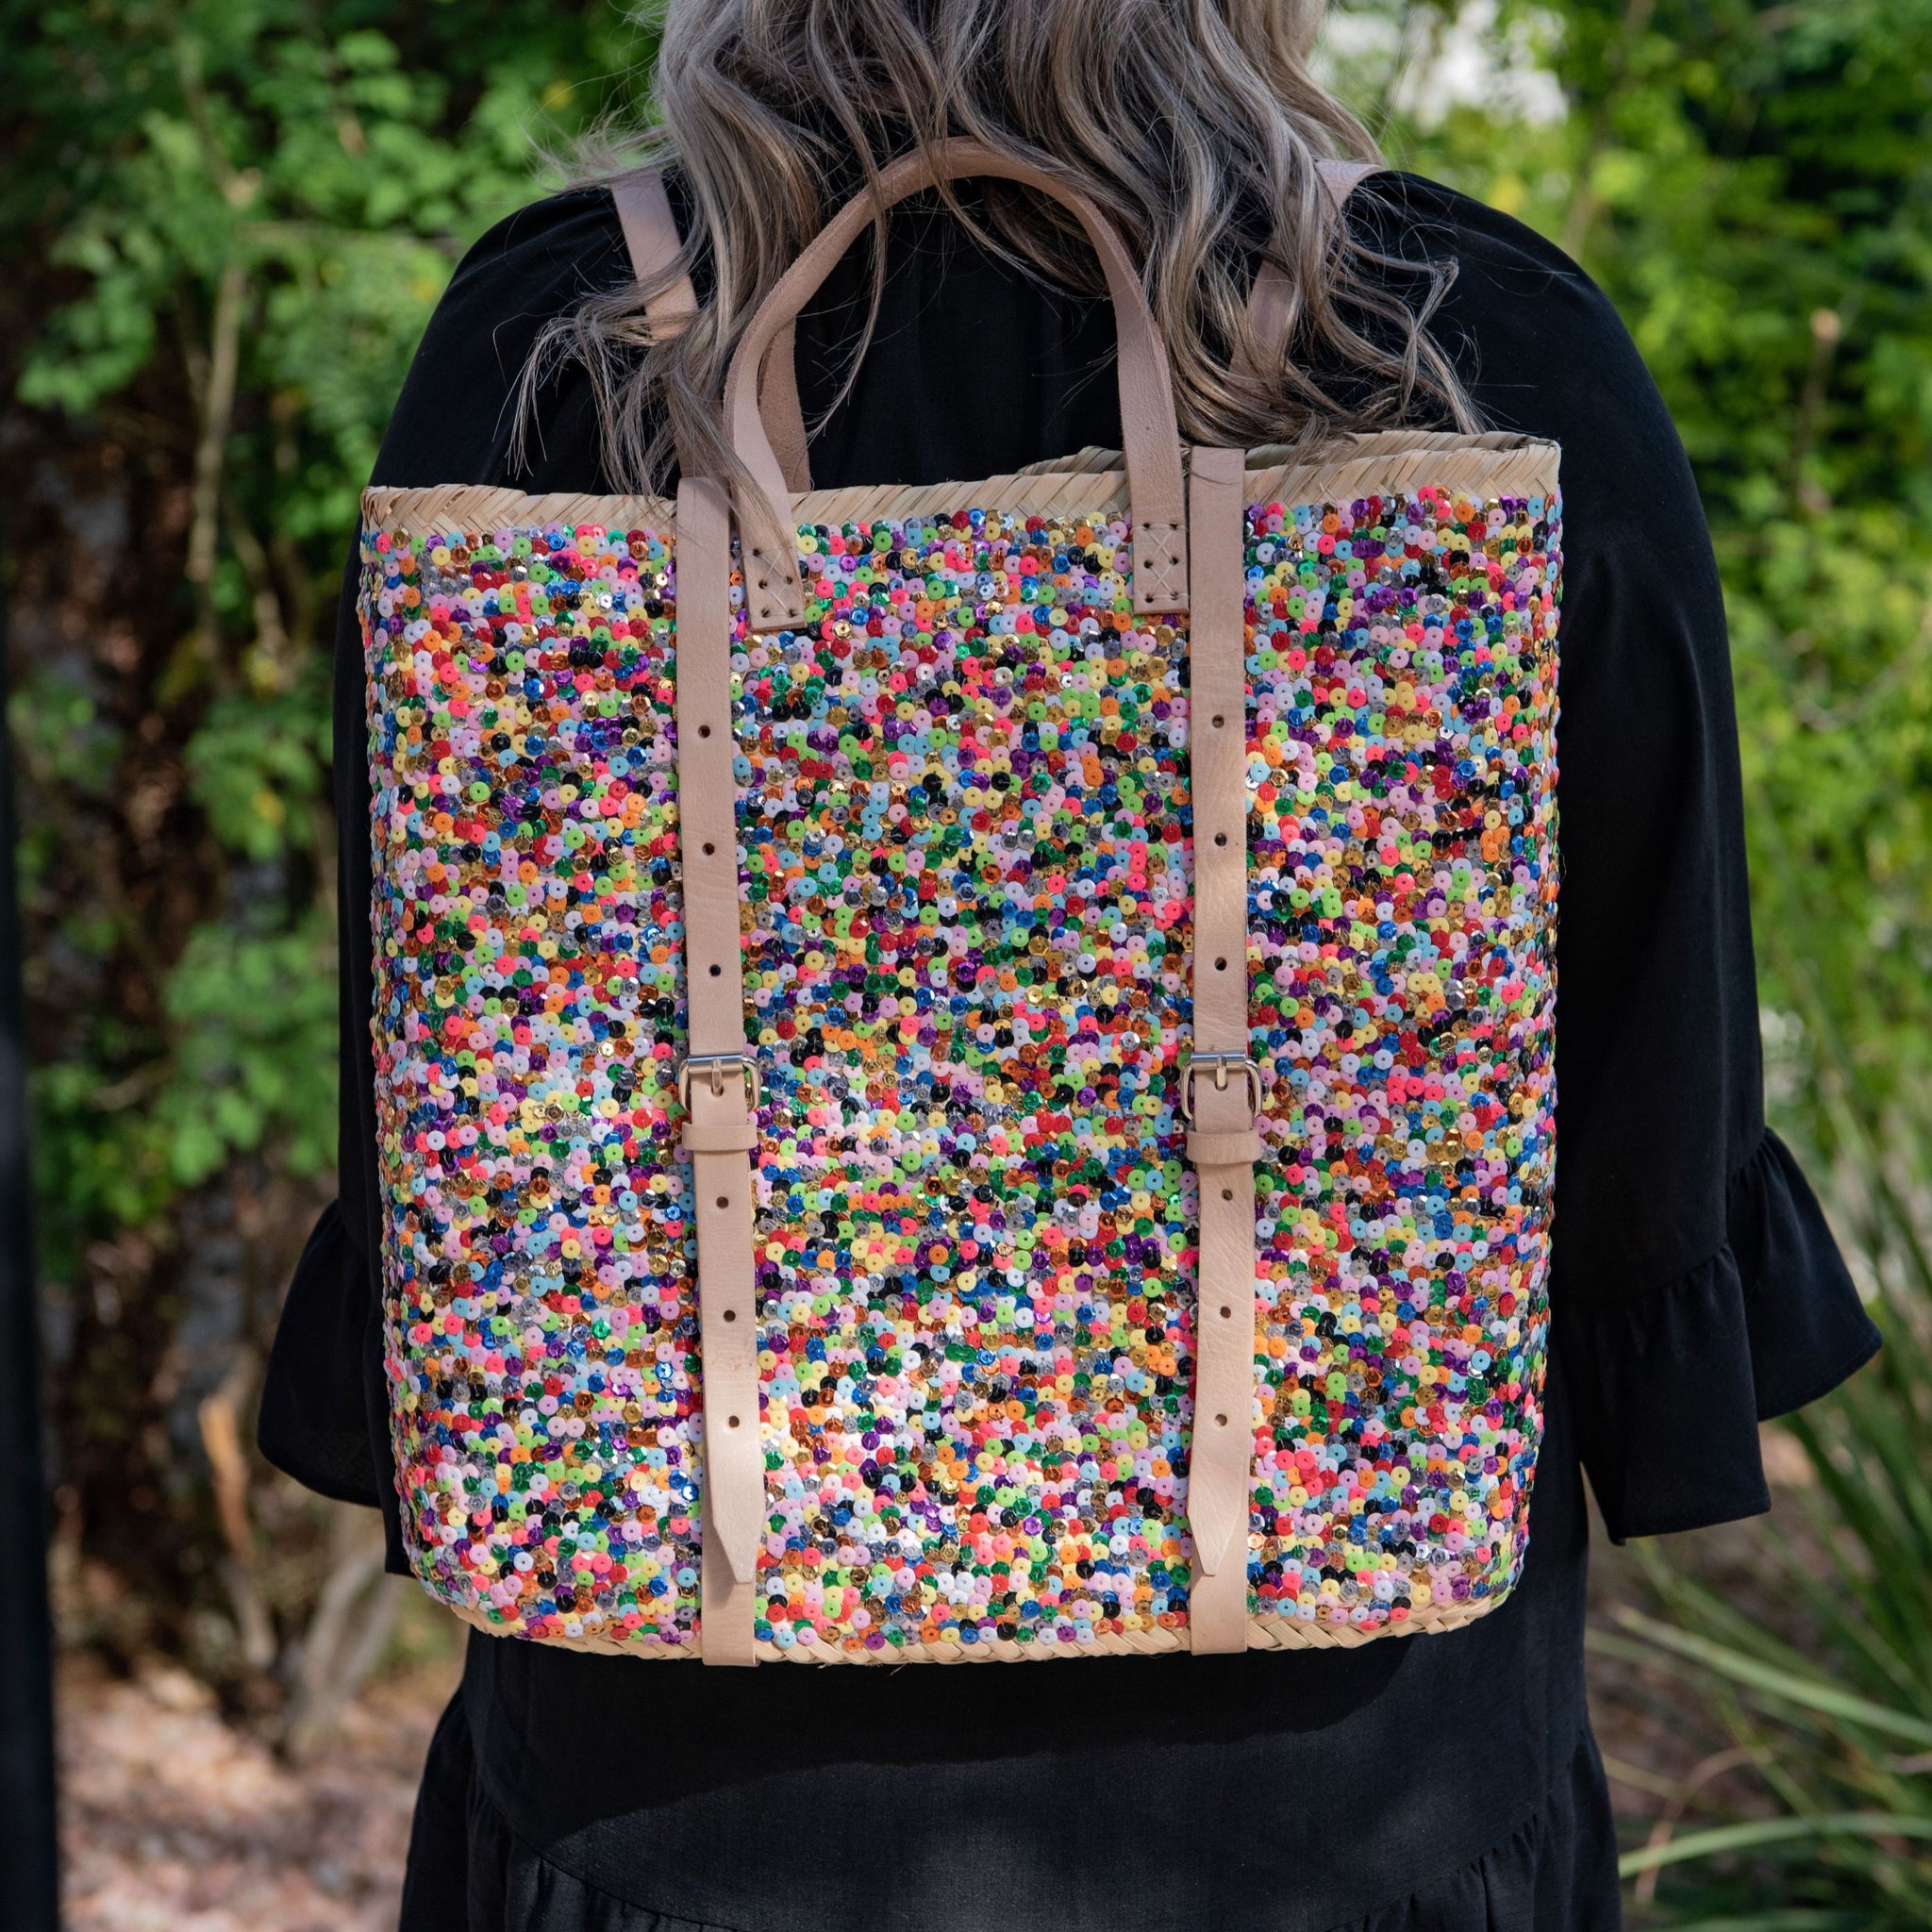 Woman wearing Straw Backpack with Multi-Colored Sequin